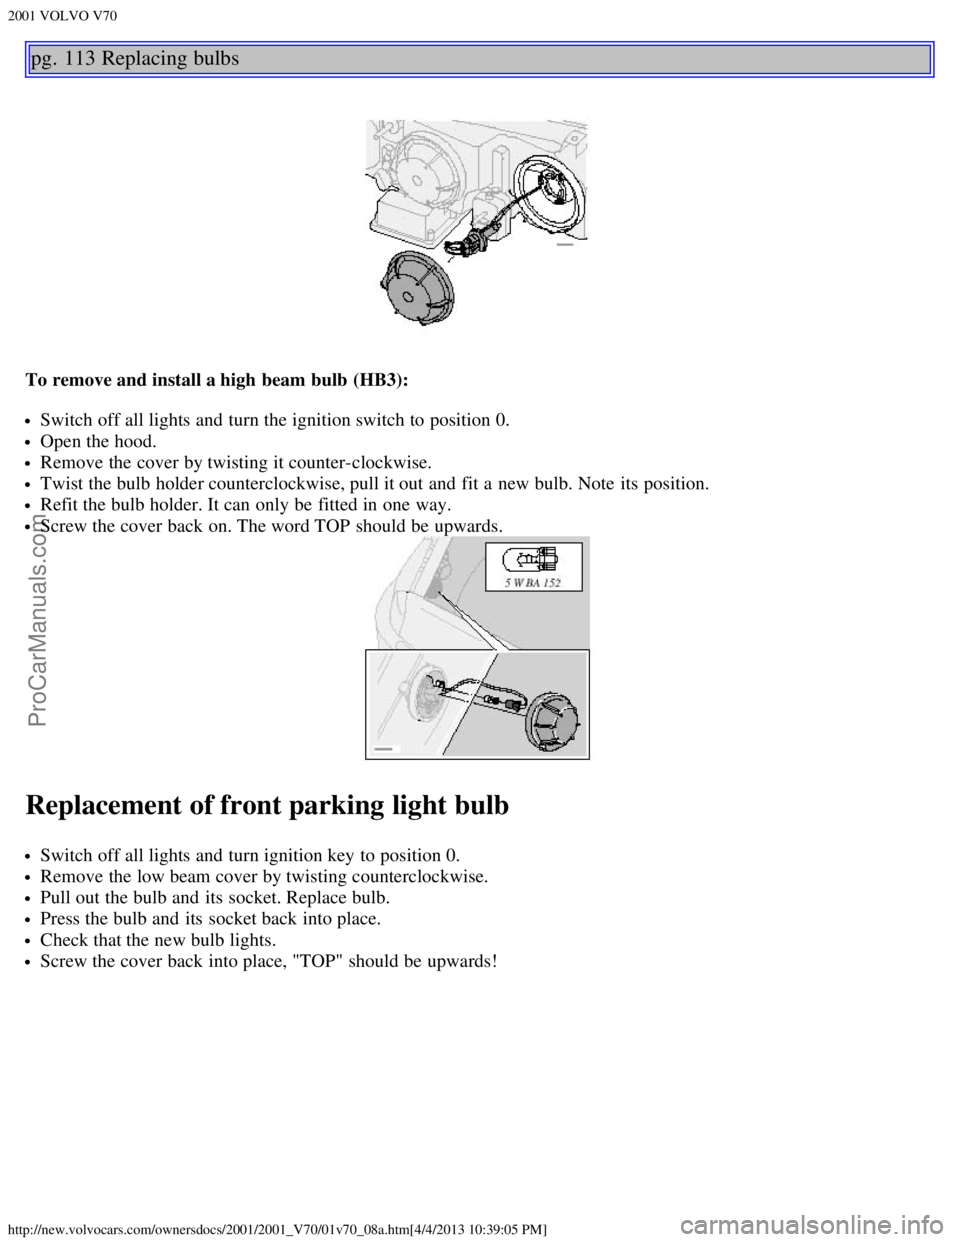 VOLVO V70 2001  Owners Manual 2001 VOLVO V70
http://new.volvocars.com/ownersdocs/2001/2001_V70/01v70_08a.htm[4/4/2013 10:39:05 PM]
pg. 113 Replacing bulbs
To remove and install a high beam bulb  (HB3):
Switch off all lights and  t